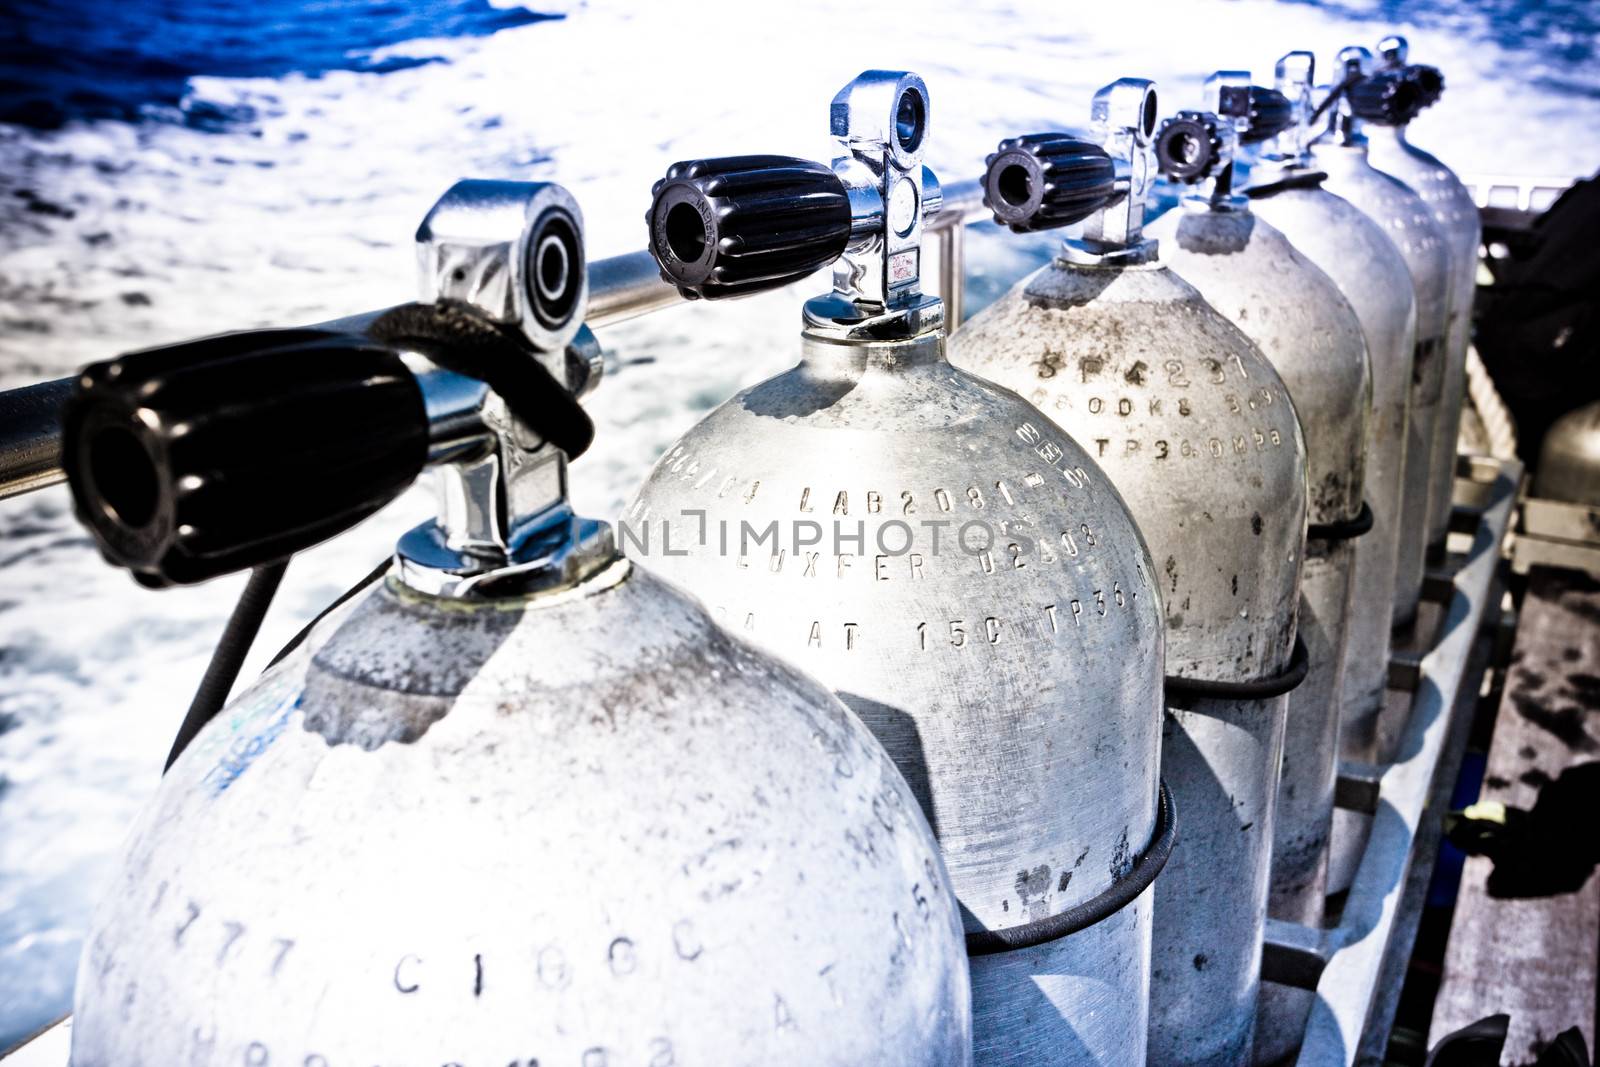 Rows of air tanks for scuba diving by jrstock